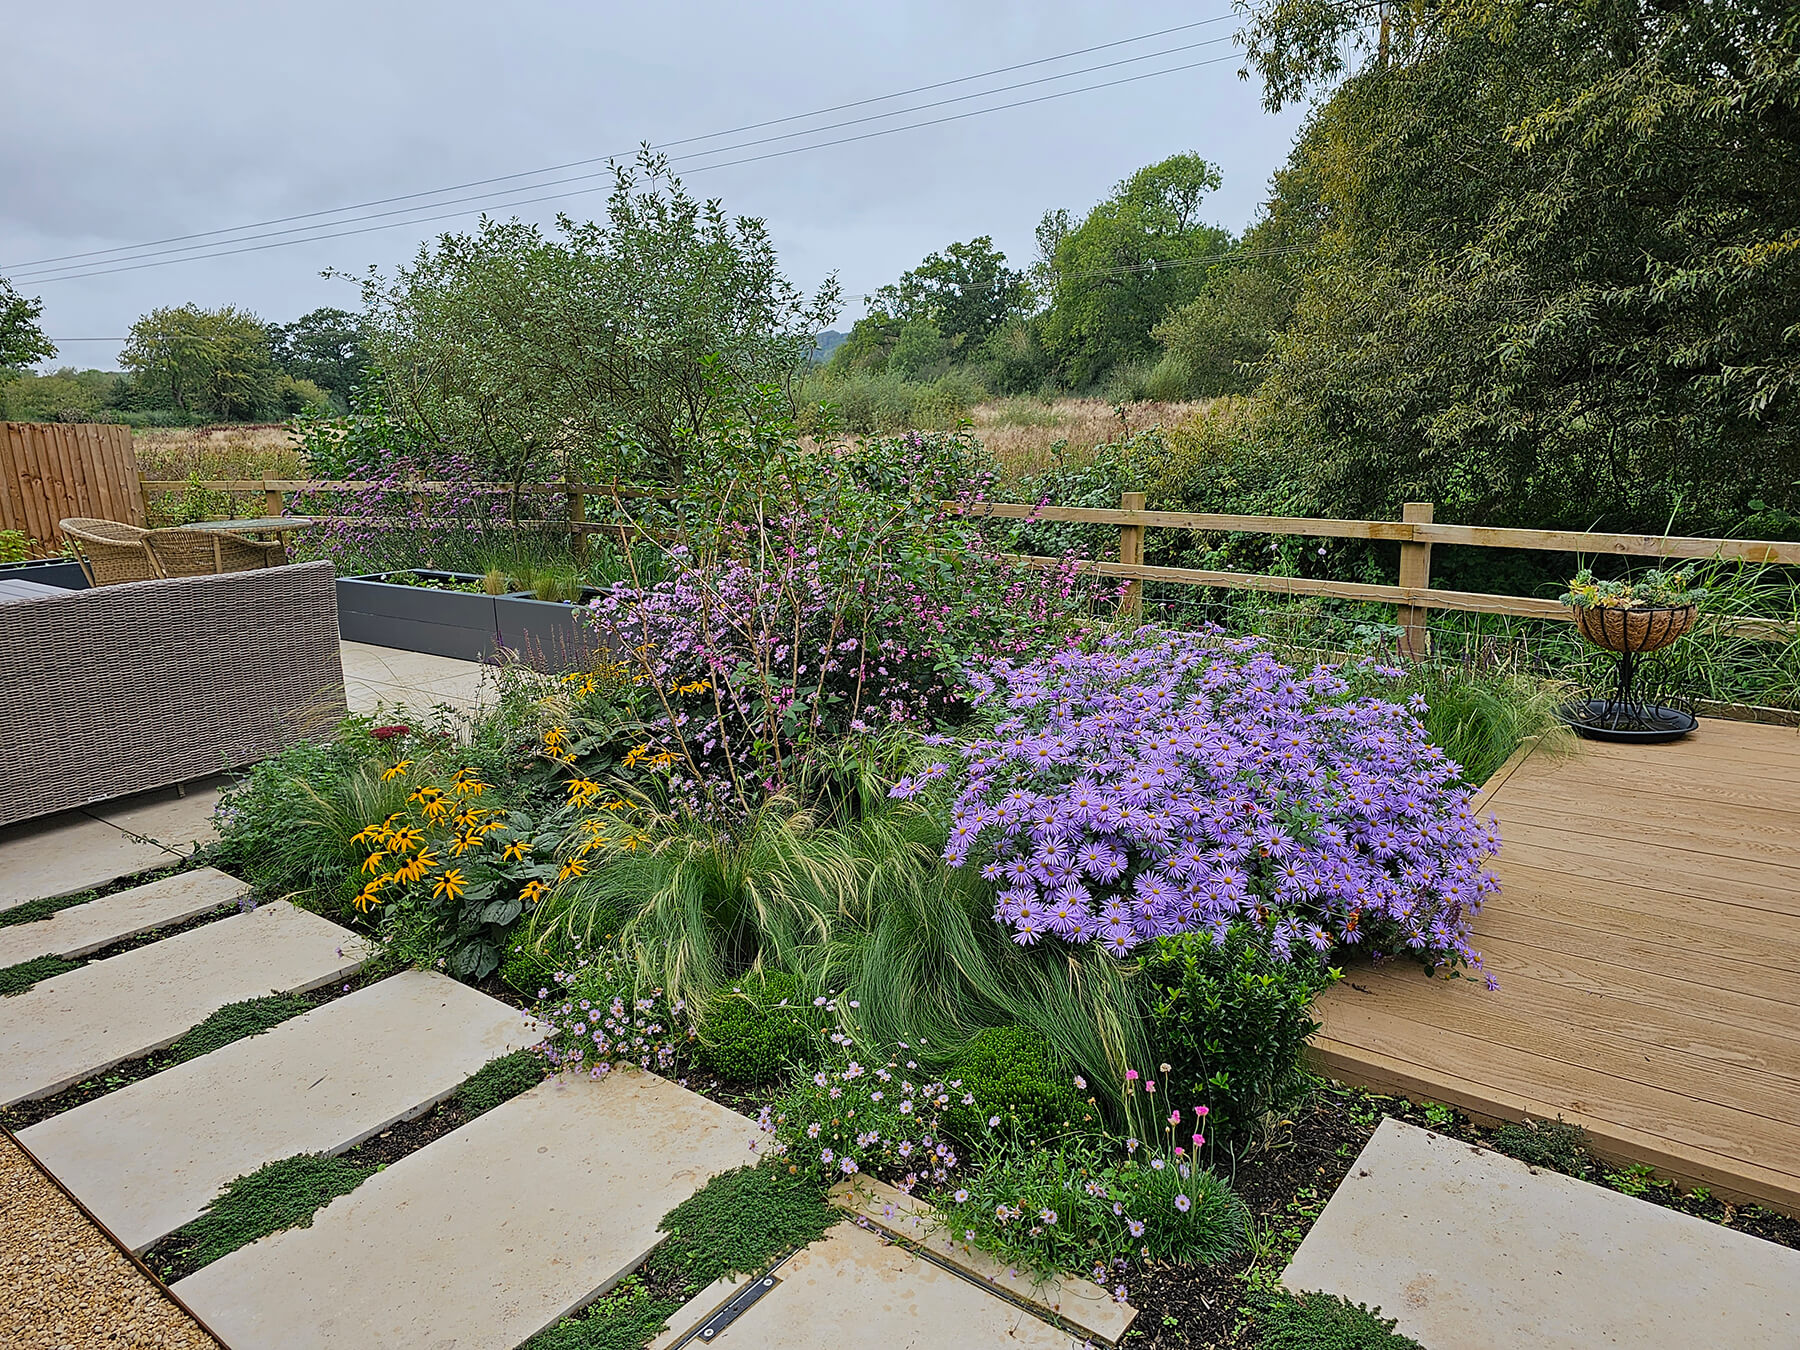 The Garden with a View, A new build garden plot redesigned to harness the view featuring planting to echo the landscape beyond, a sundeck and paving interplanted with thyme. Designed by April House – Award Winning Cotswolds Garden Design